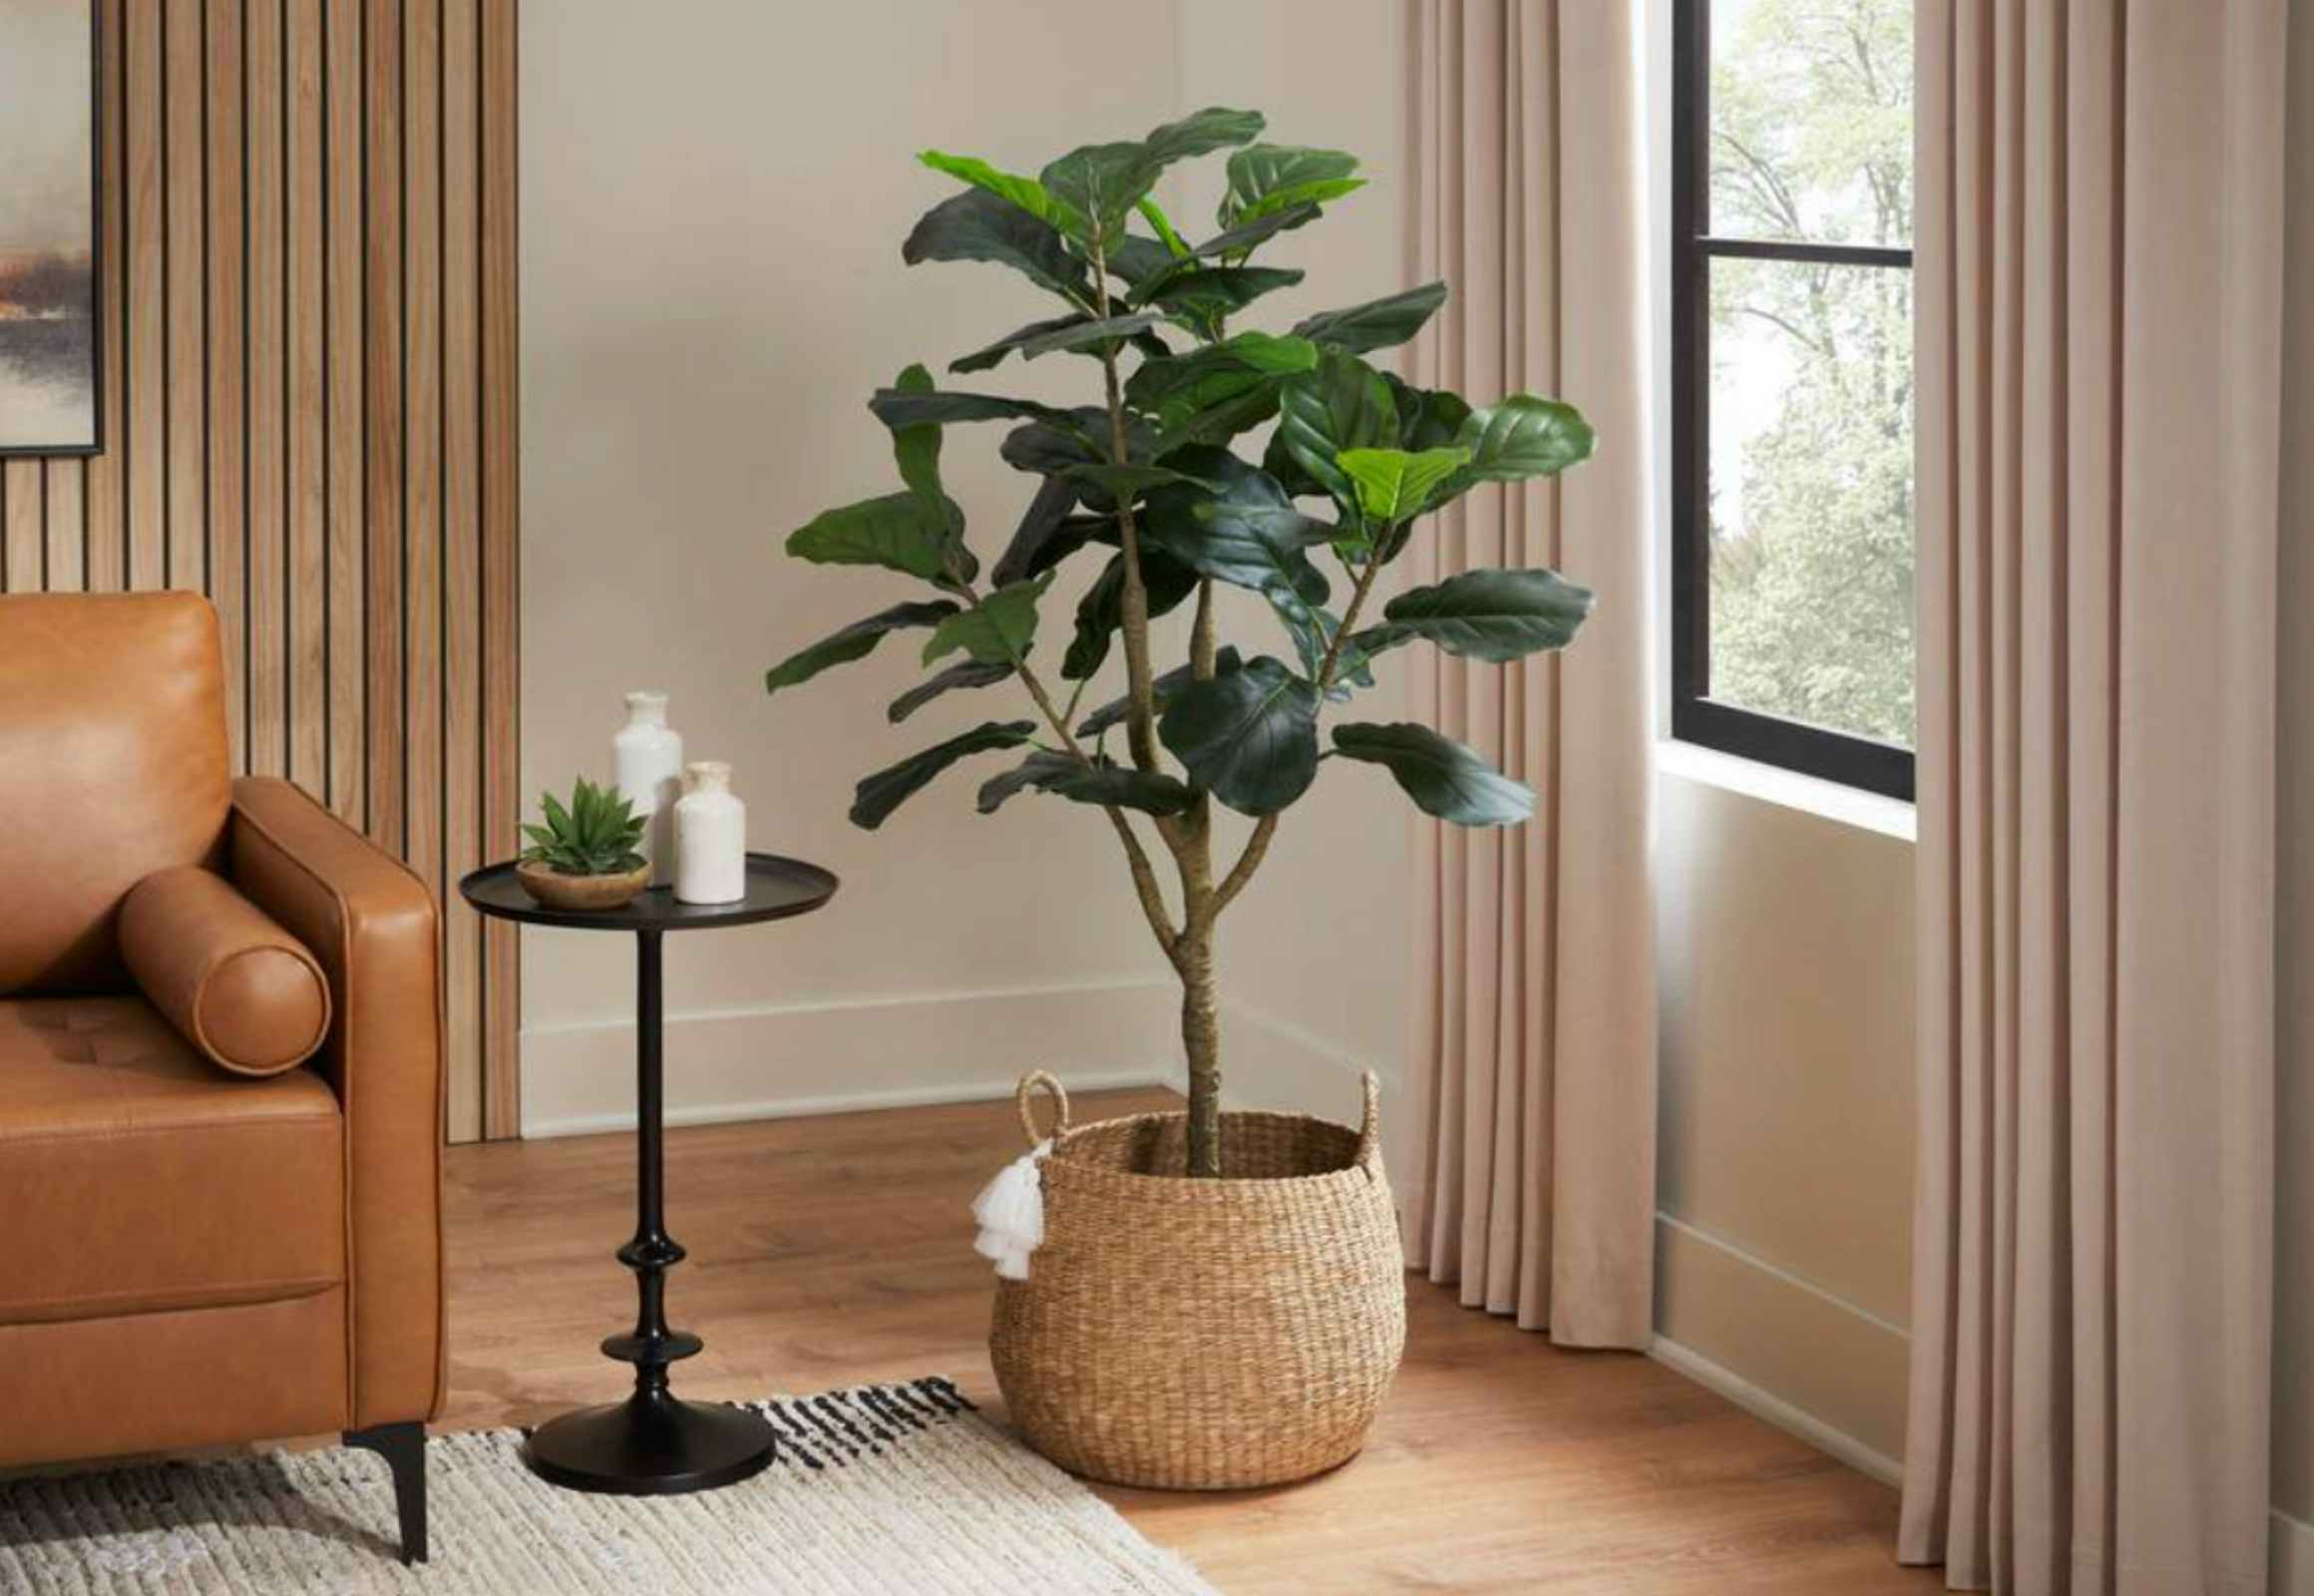 Faux Fiddle Leaf Fig Tree, Only $59 Shipped at Home Depot